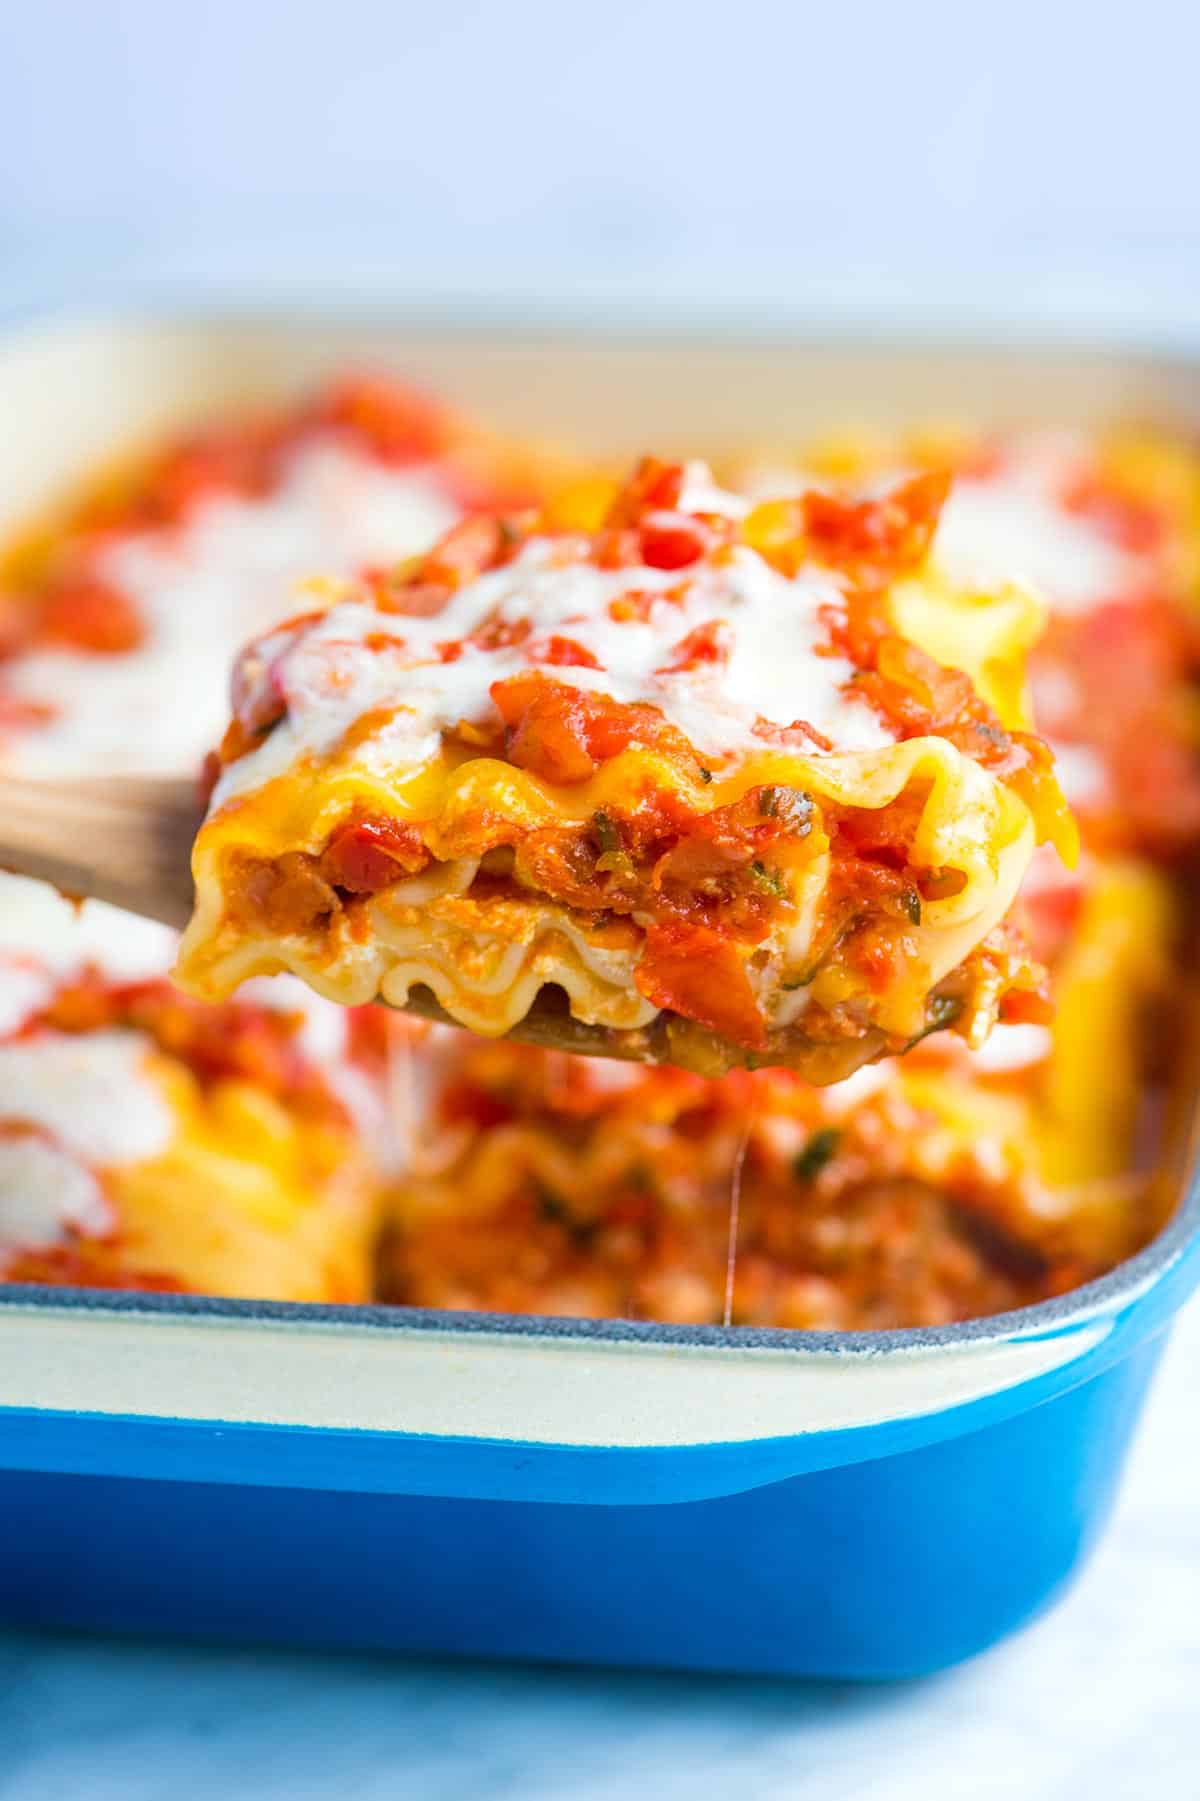 These easy lasagna roll ups with fresh vegetables, a light tomato sauce and cheese are a must make. Make them now or prep and freeze for later.